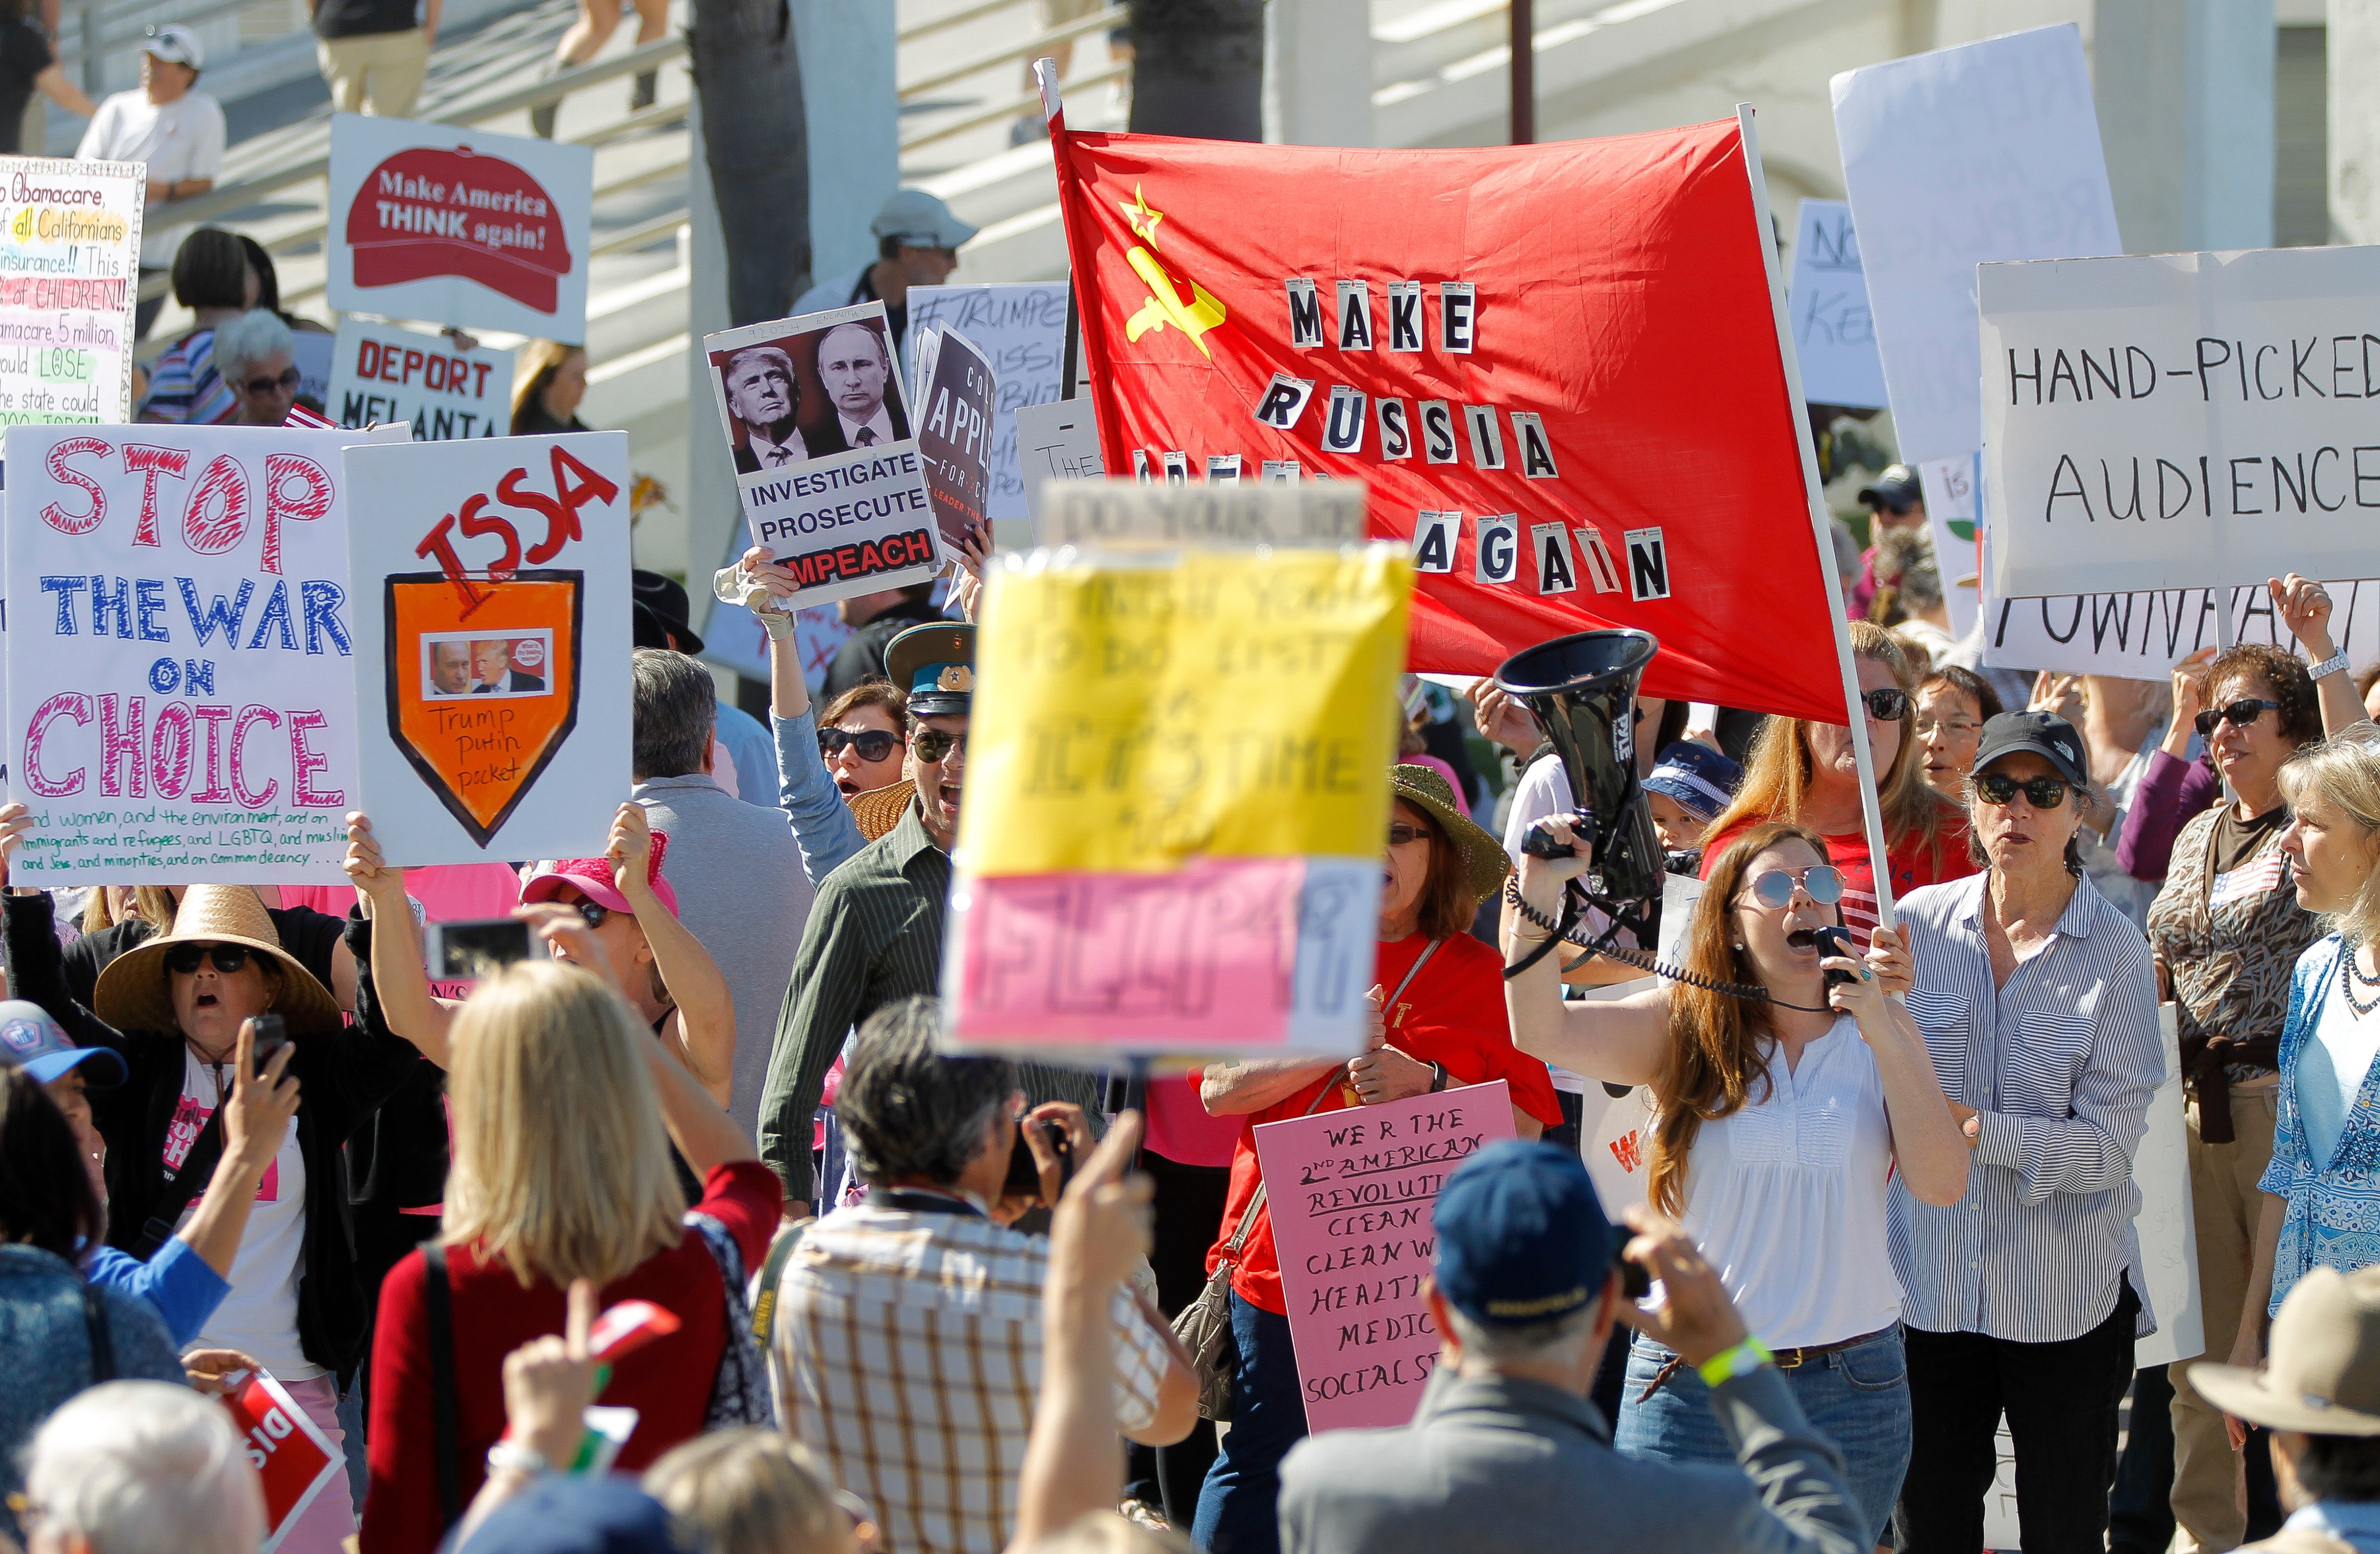 People protest outside of the Junior Seau Beach Community Center as U.S. Rep. Darrell Issa holds a town hall meeting inside on Saturday, March 11, 2017 in Oceanside, Calif.   Issa held the meetings to discuss health care reform with constituents from his district, which straddles Orange County and San Diego County. (Hayne Palmour IV&mdash;AP)